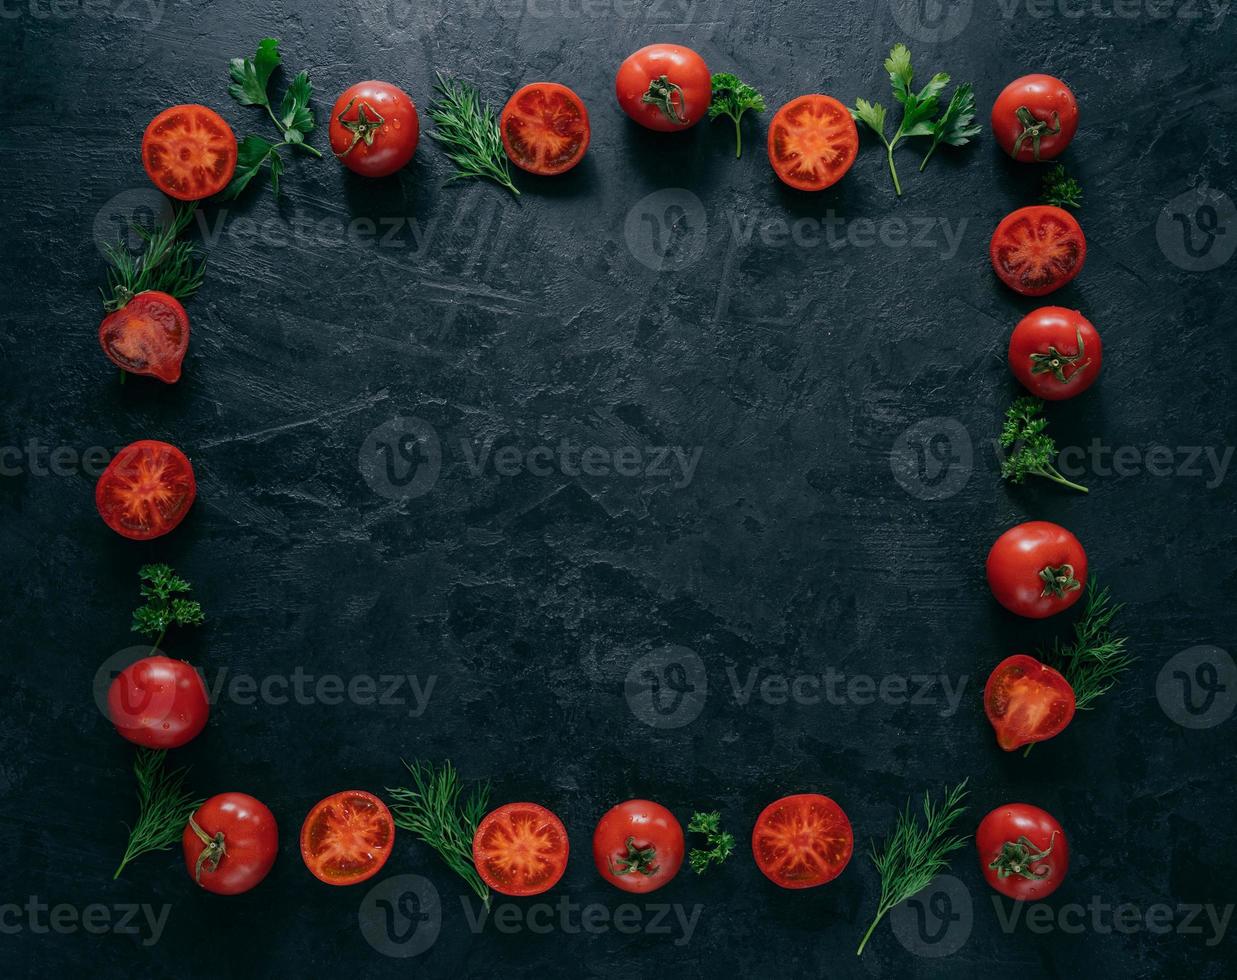 Composition of red tomatoes and green fresh parsley and dill lying on dark background in form of frame. Vegeterian food concept. Free space in middle photo